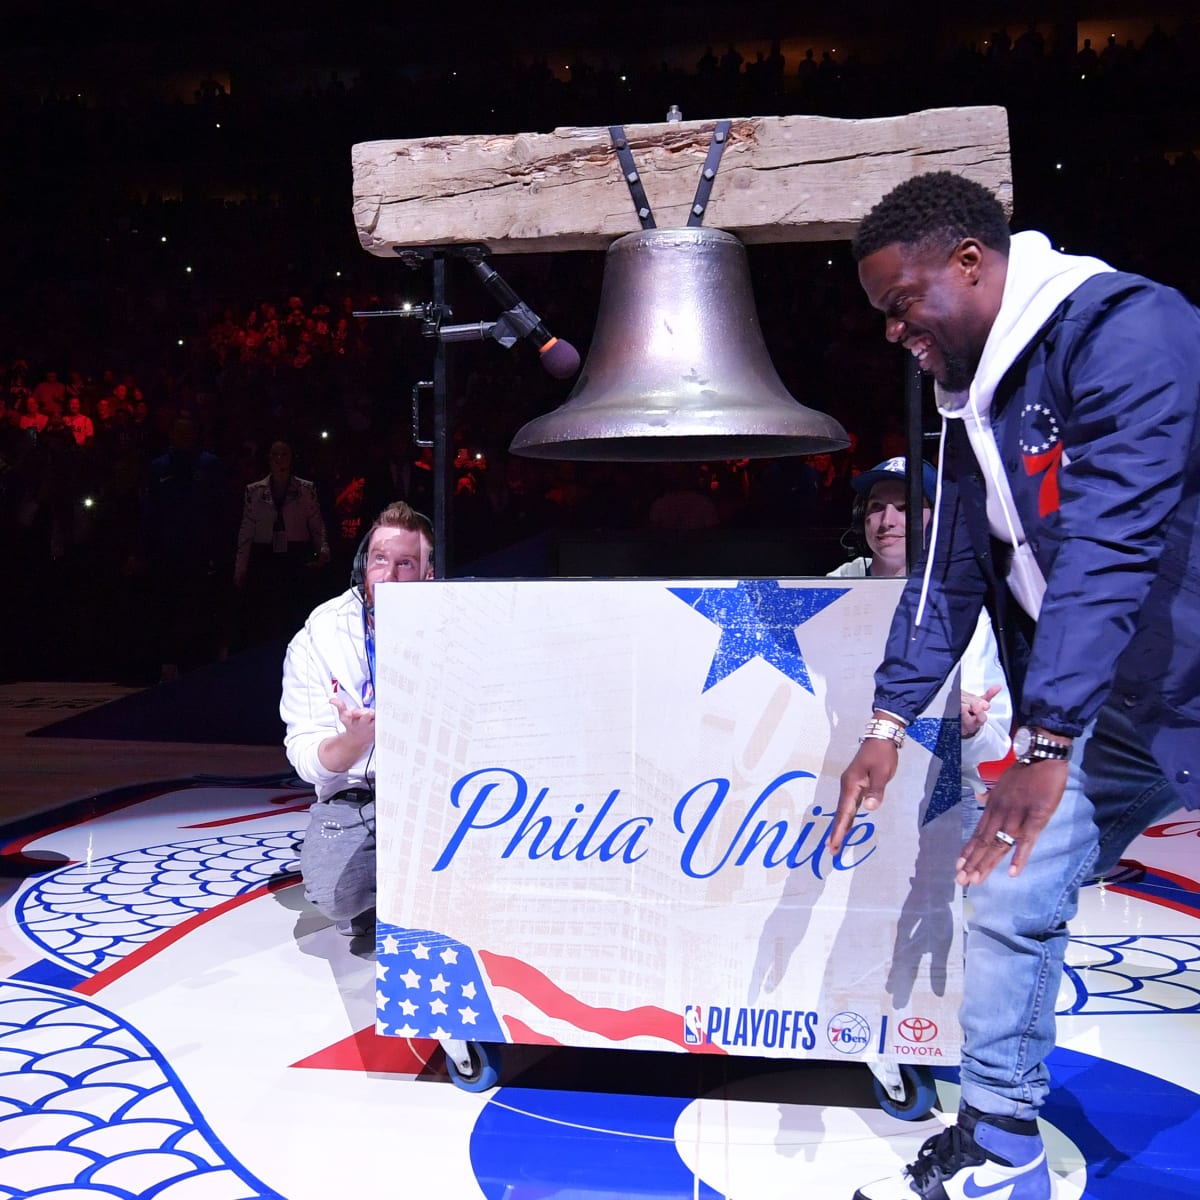 Sixers Playoff Bell Ringer: Same ol' spineless Sixers - Liberty